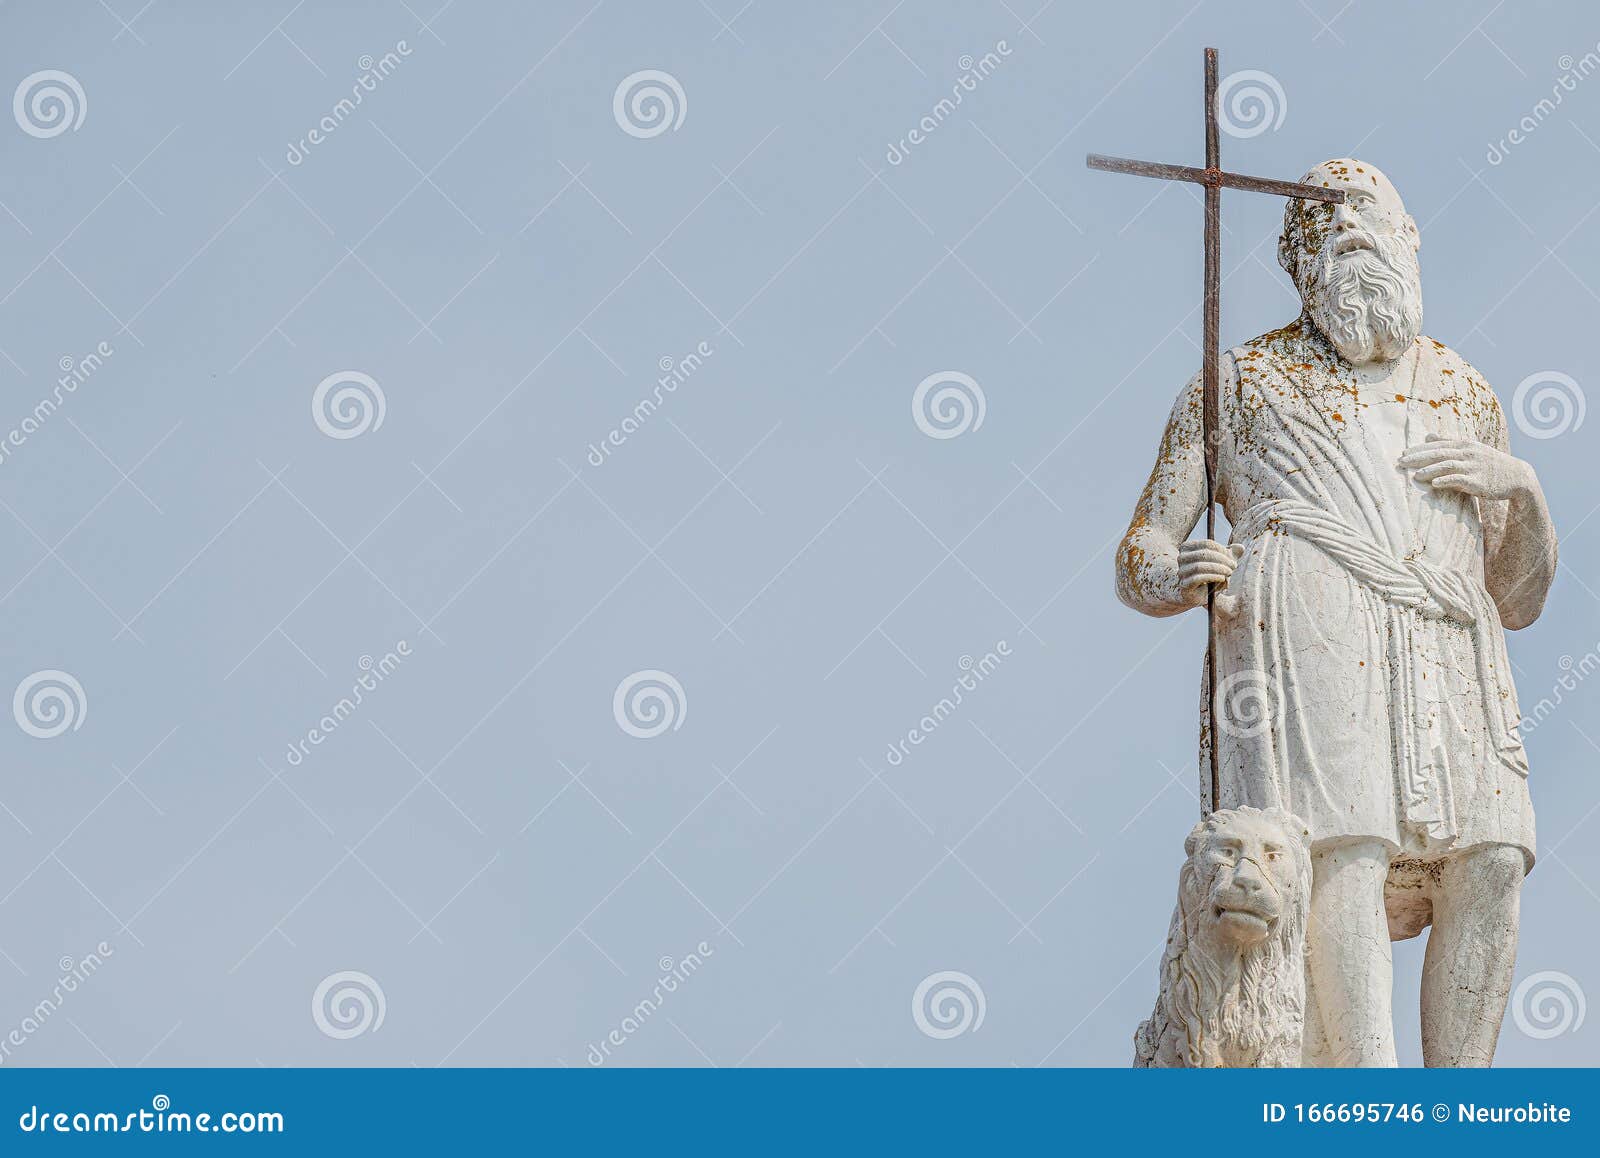 ancient aged sculpture of poor stranger pilgrim with cross and sitting lion at roof of santa maria assunta jesuits church in